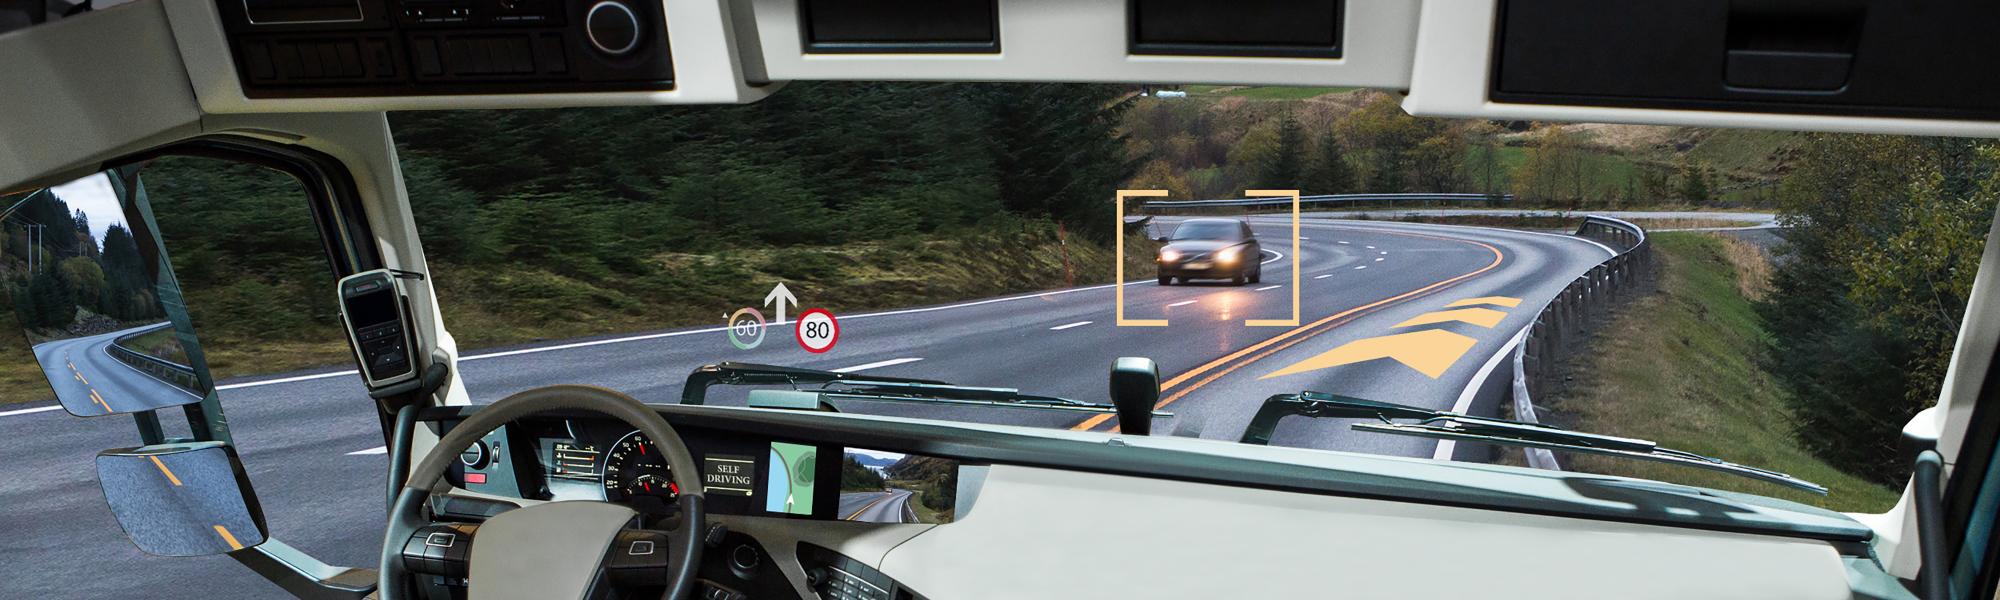 Connected Automated Driving: challenges for road transport - Self driving, driverless, autonomous